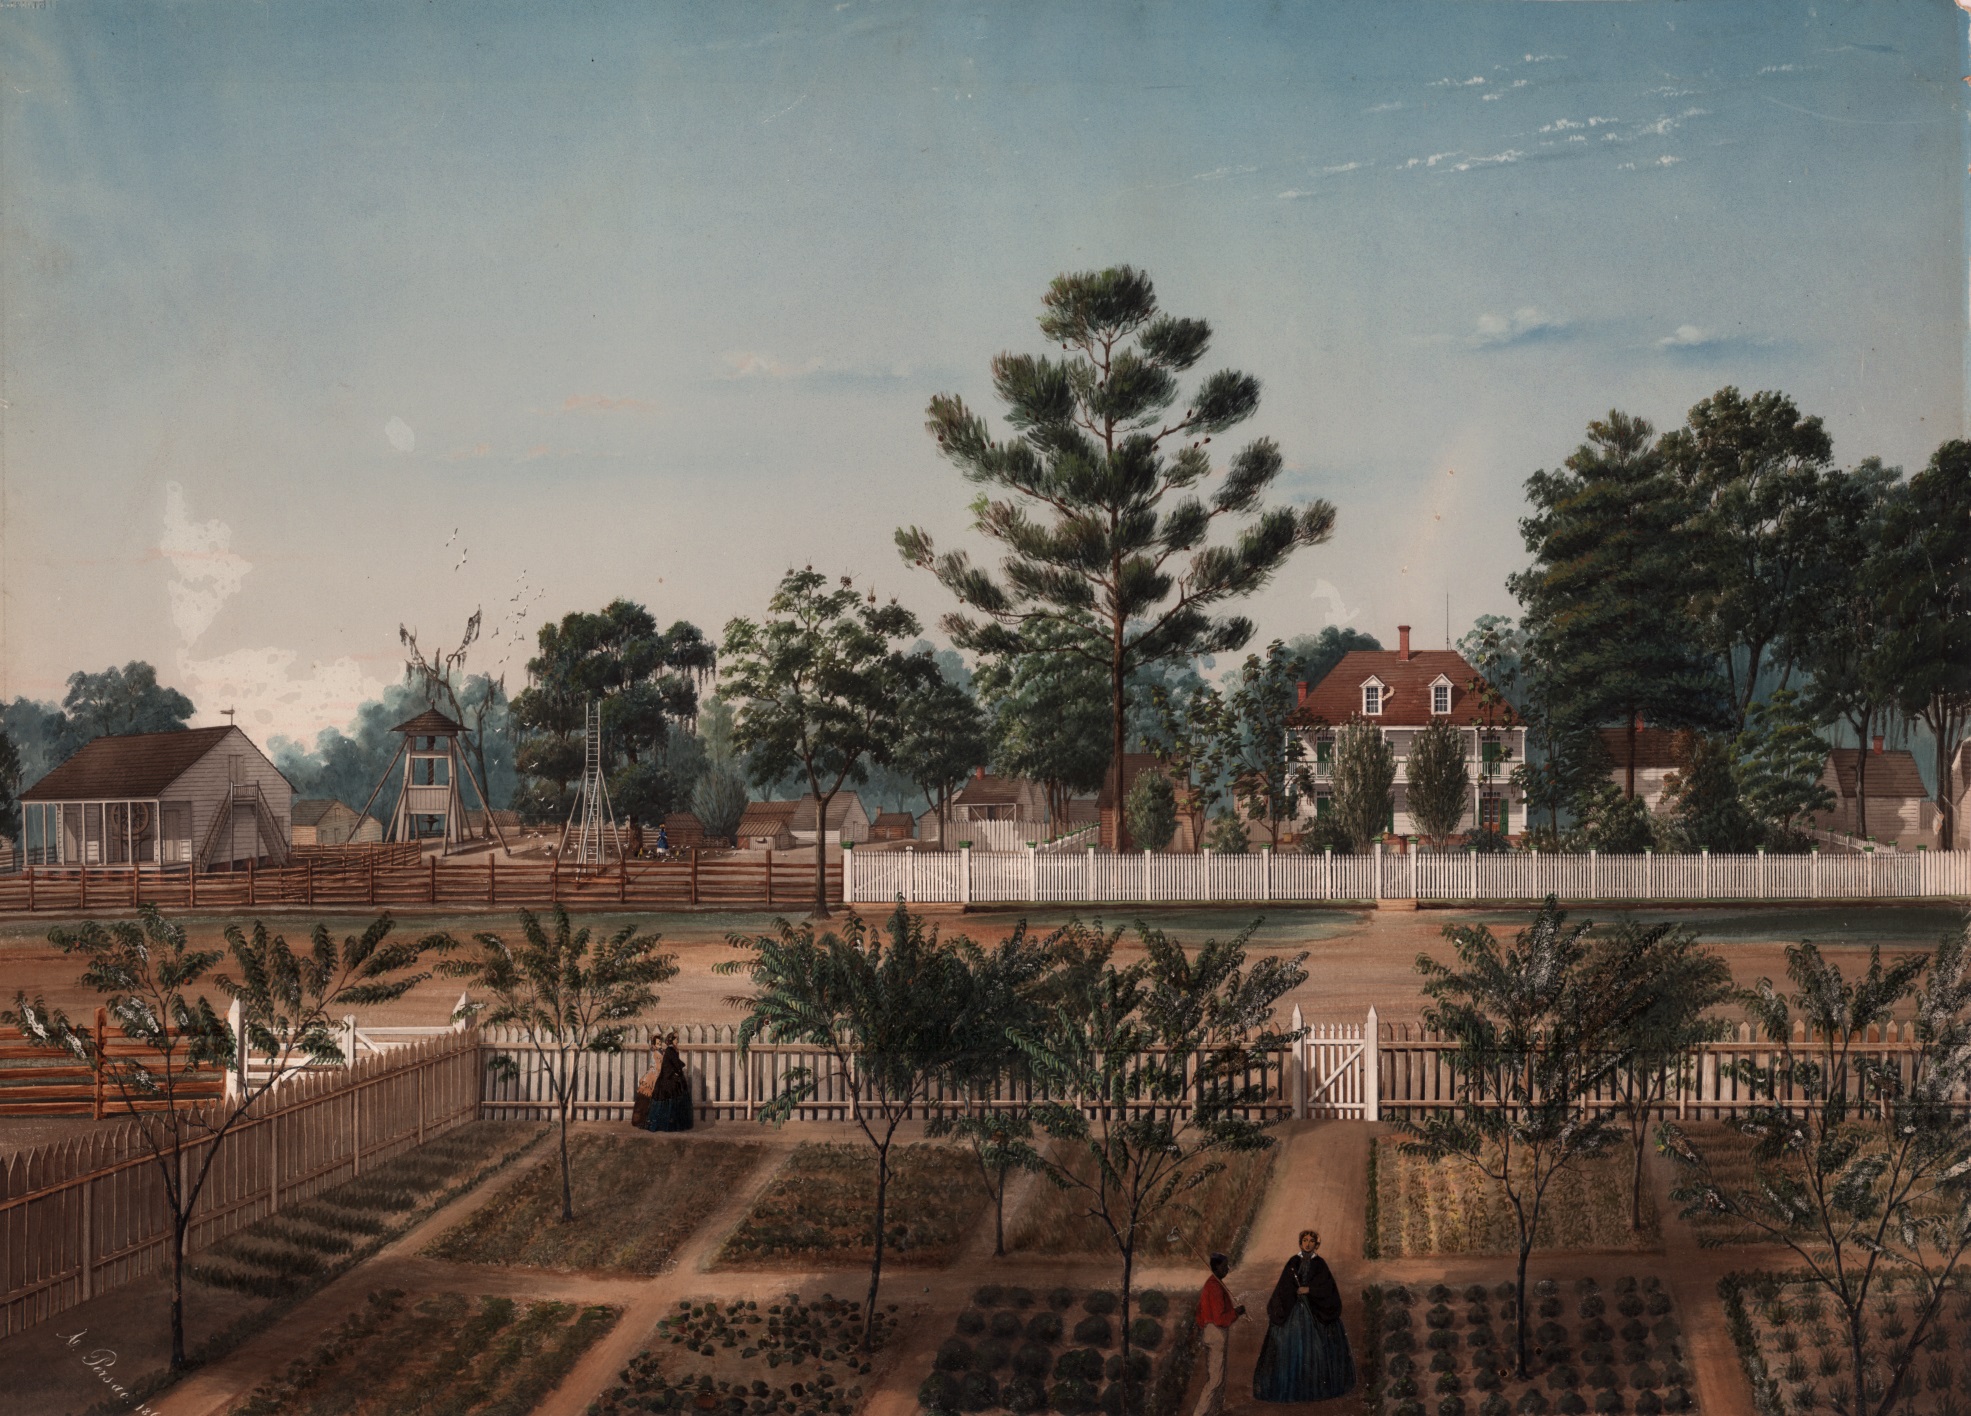 A nineteenth-century landscape painting showing cultivated fields, trees, white fences, and outbuildings.